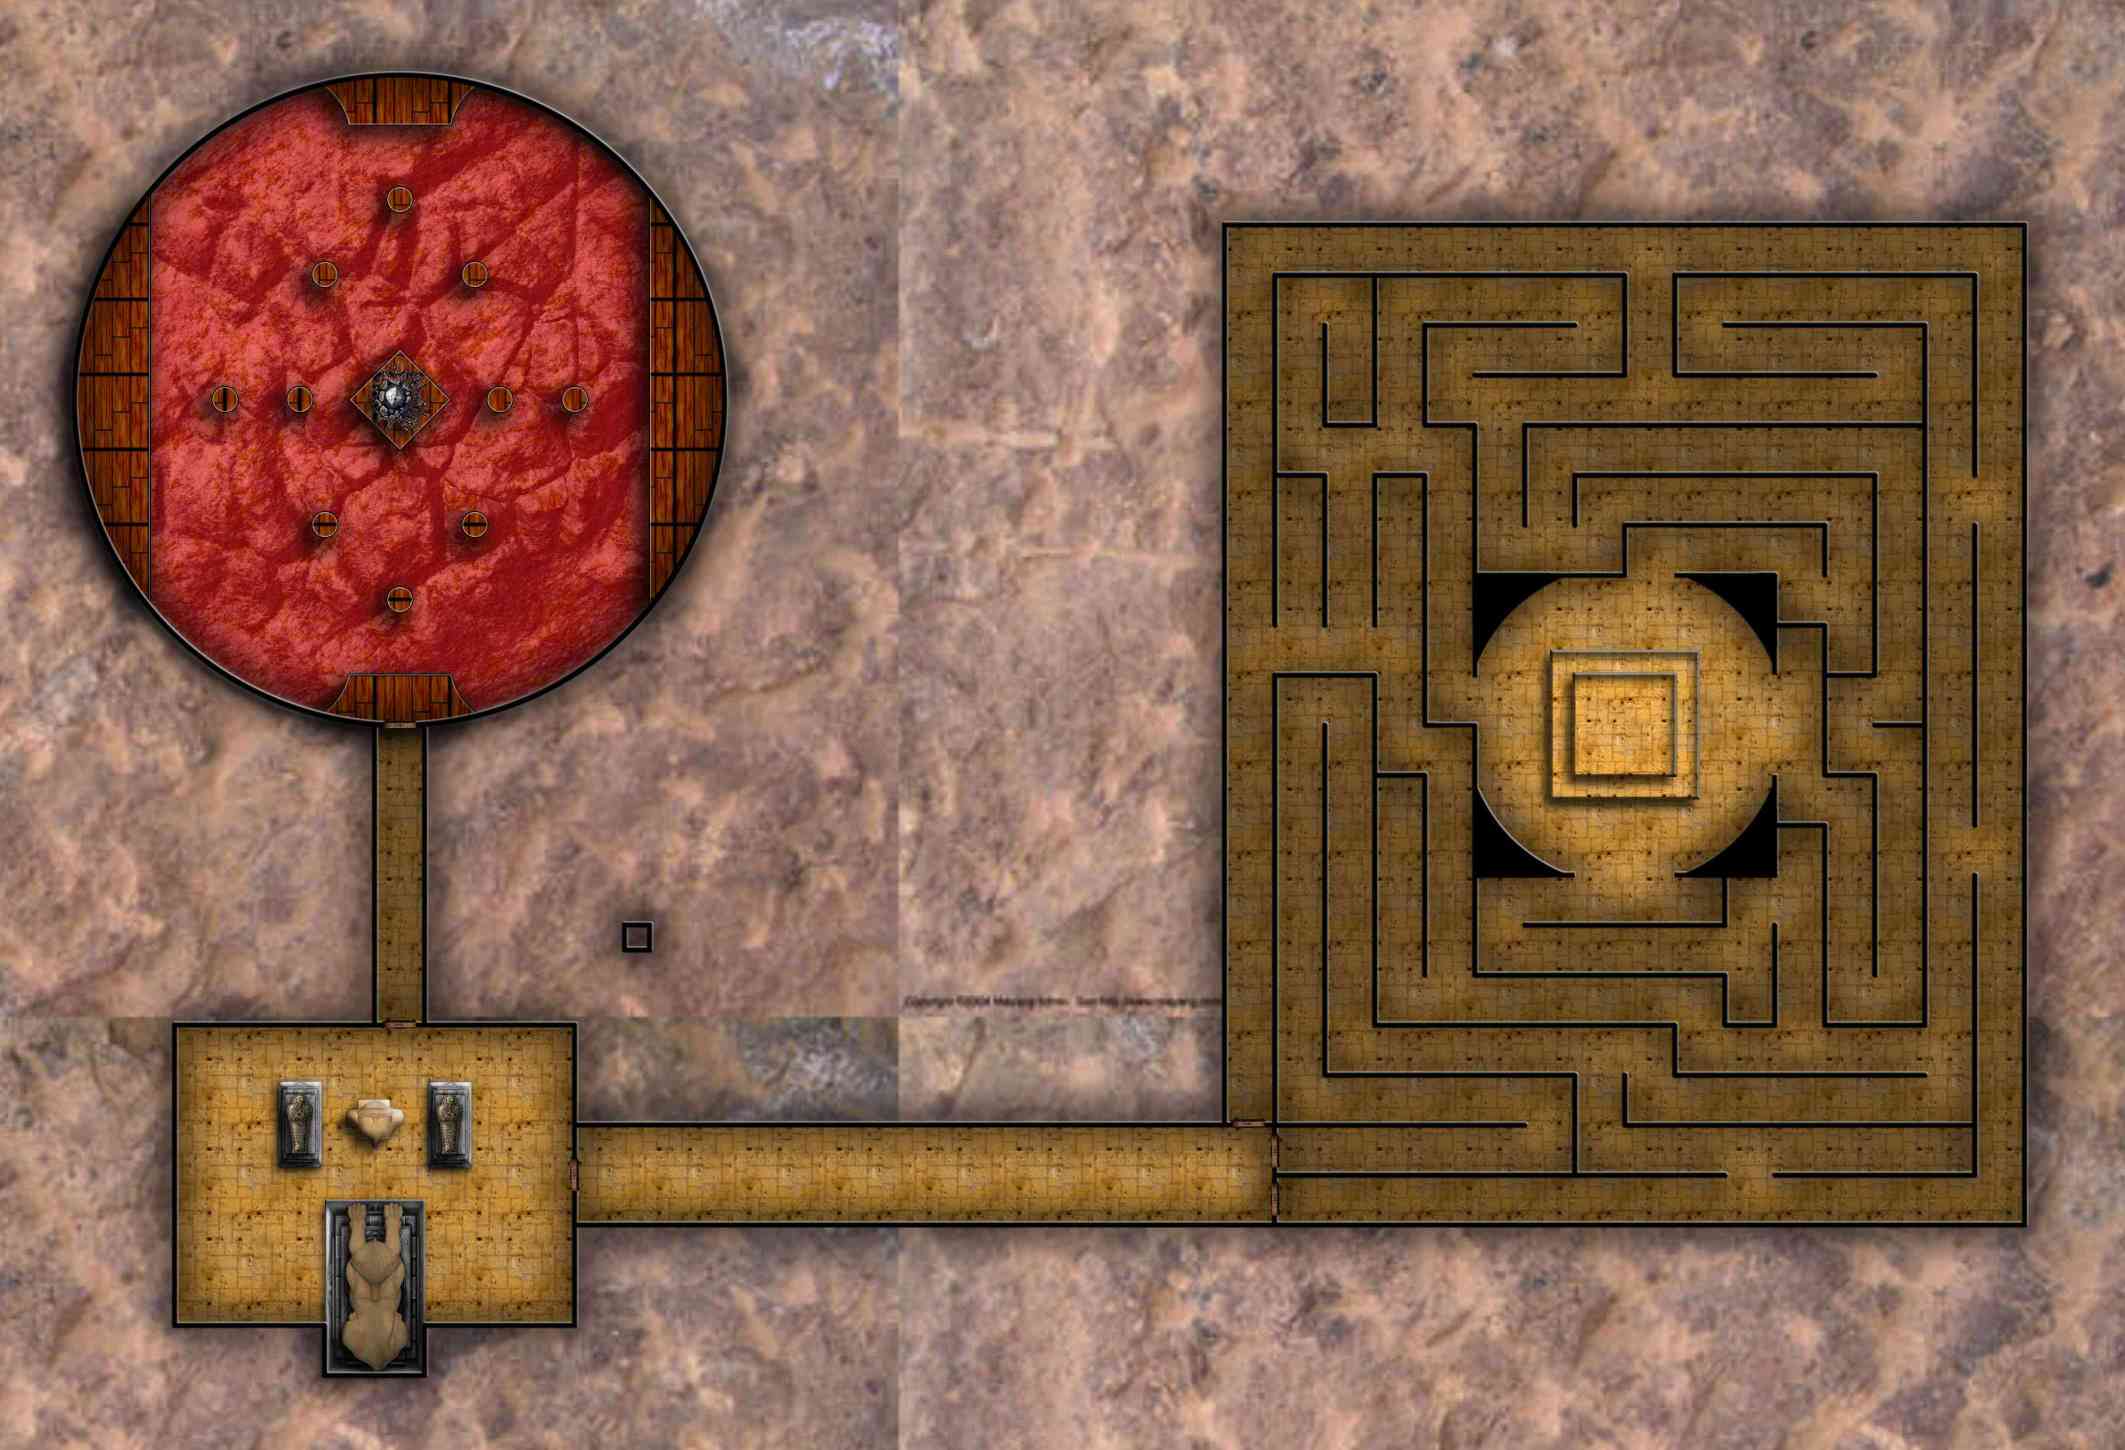 Player's Map 4 - The Halls of Fate